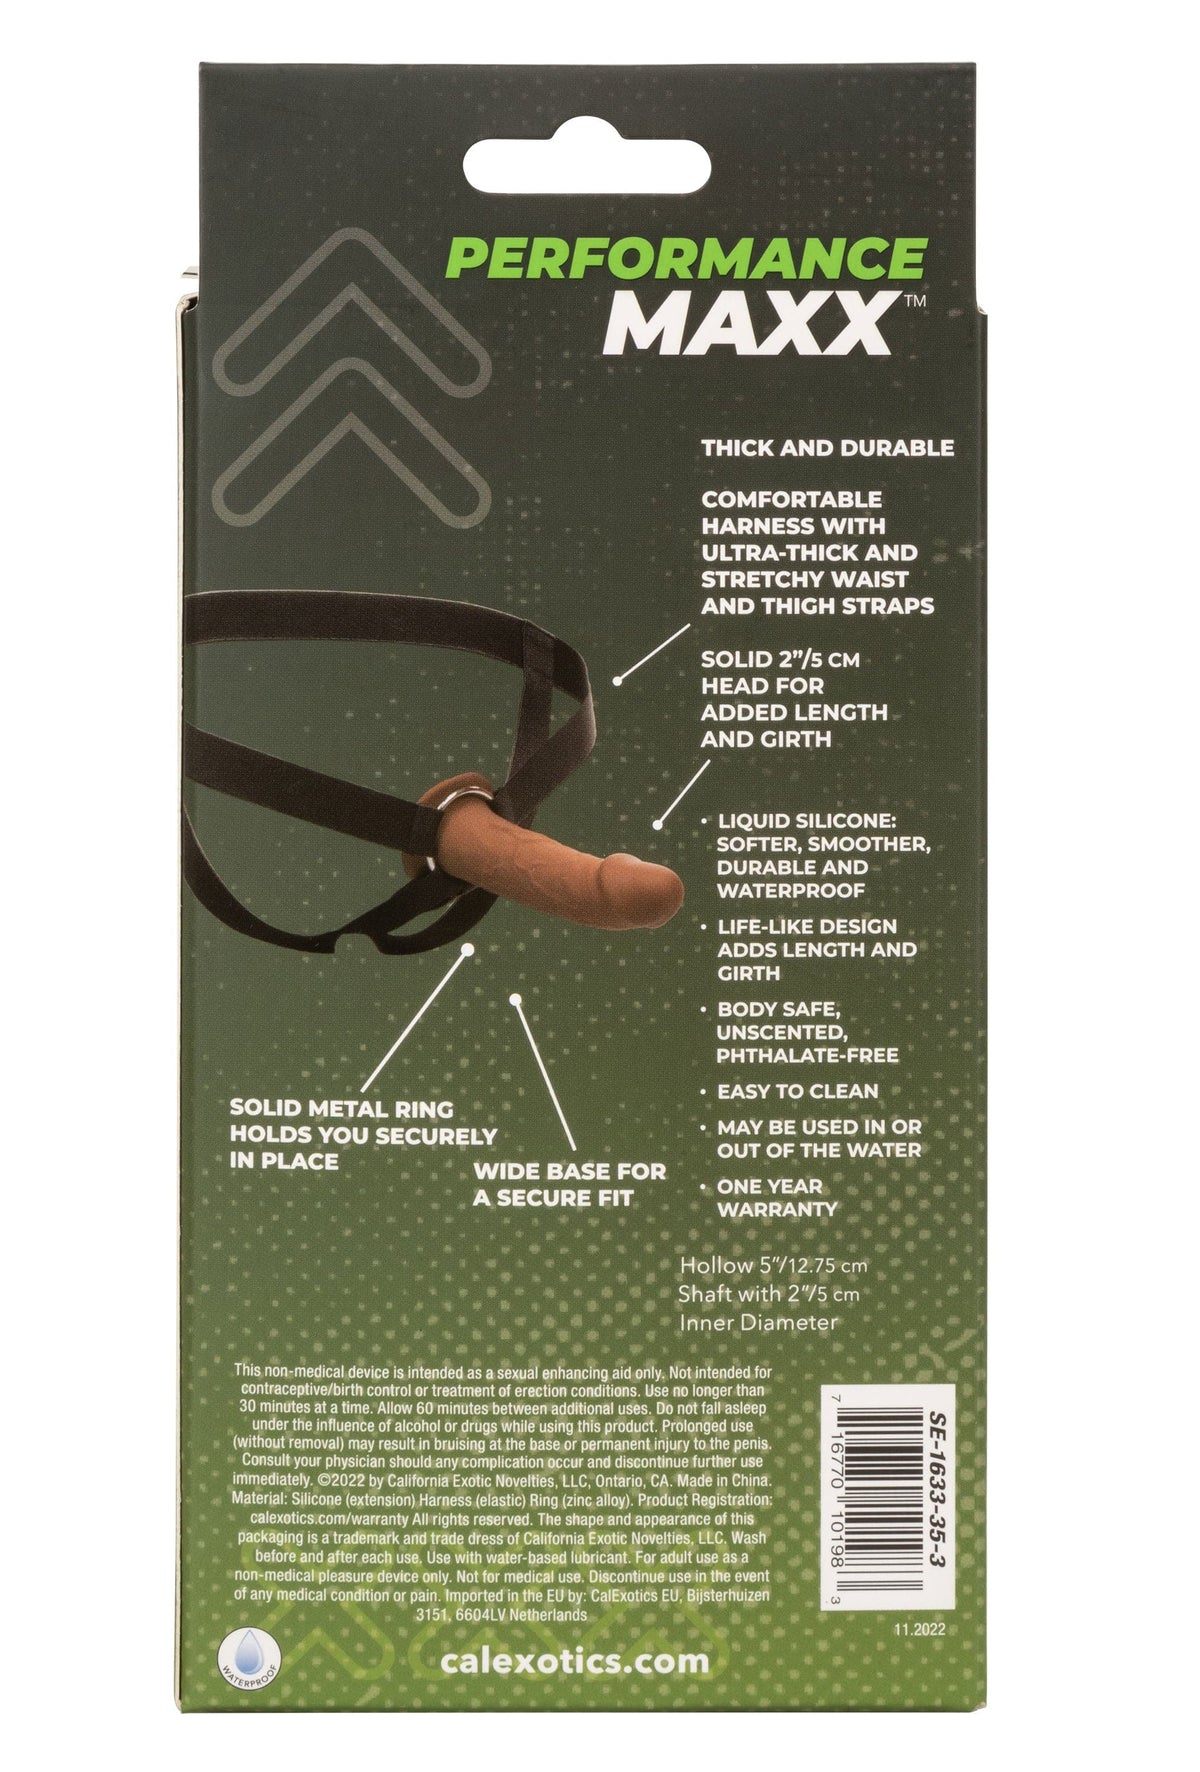 performance maxx life like extension with harness brown